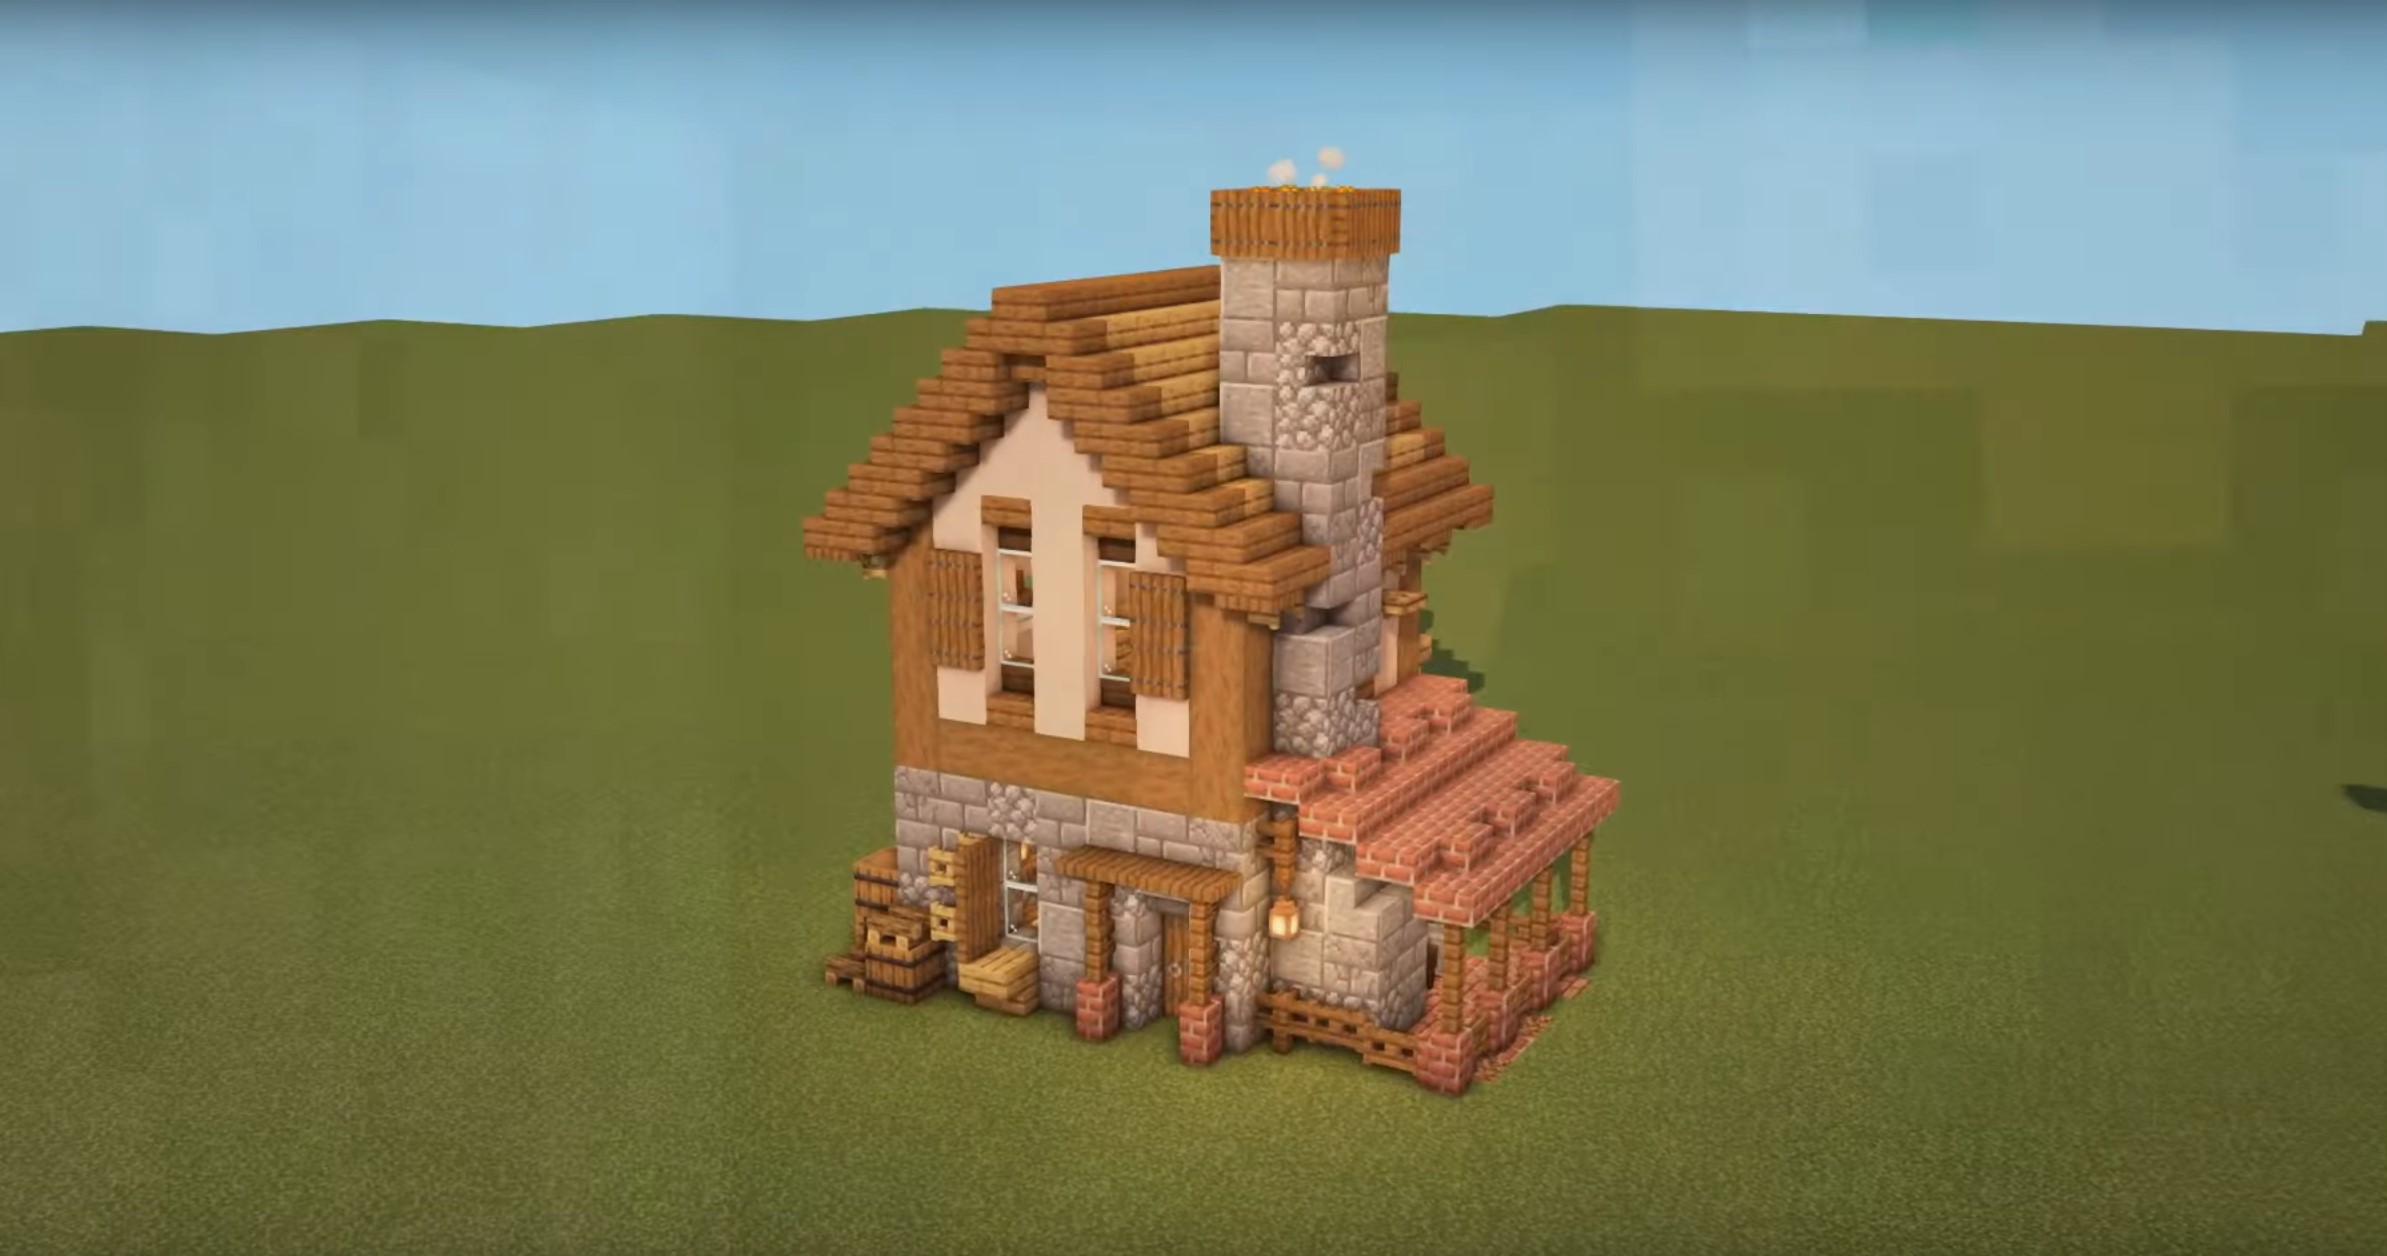 Weaponsmith's House minecraft building idea